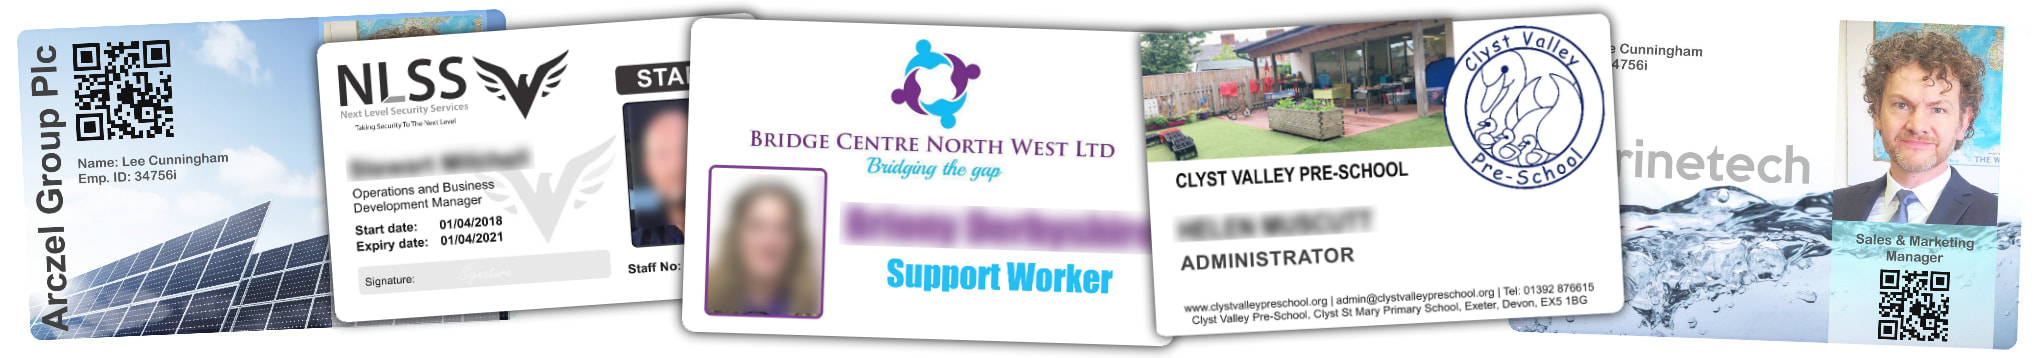 TOWN examples of staff photo ID cards | samples of employee Identity card printing | Workers ID cards printed in 